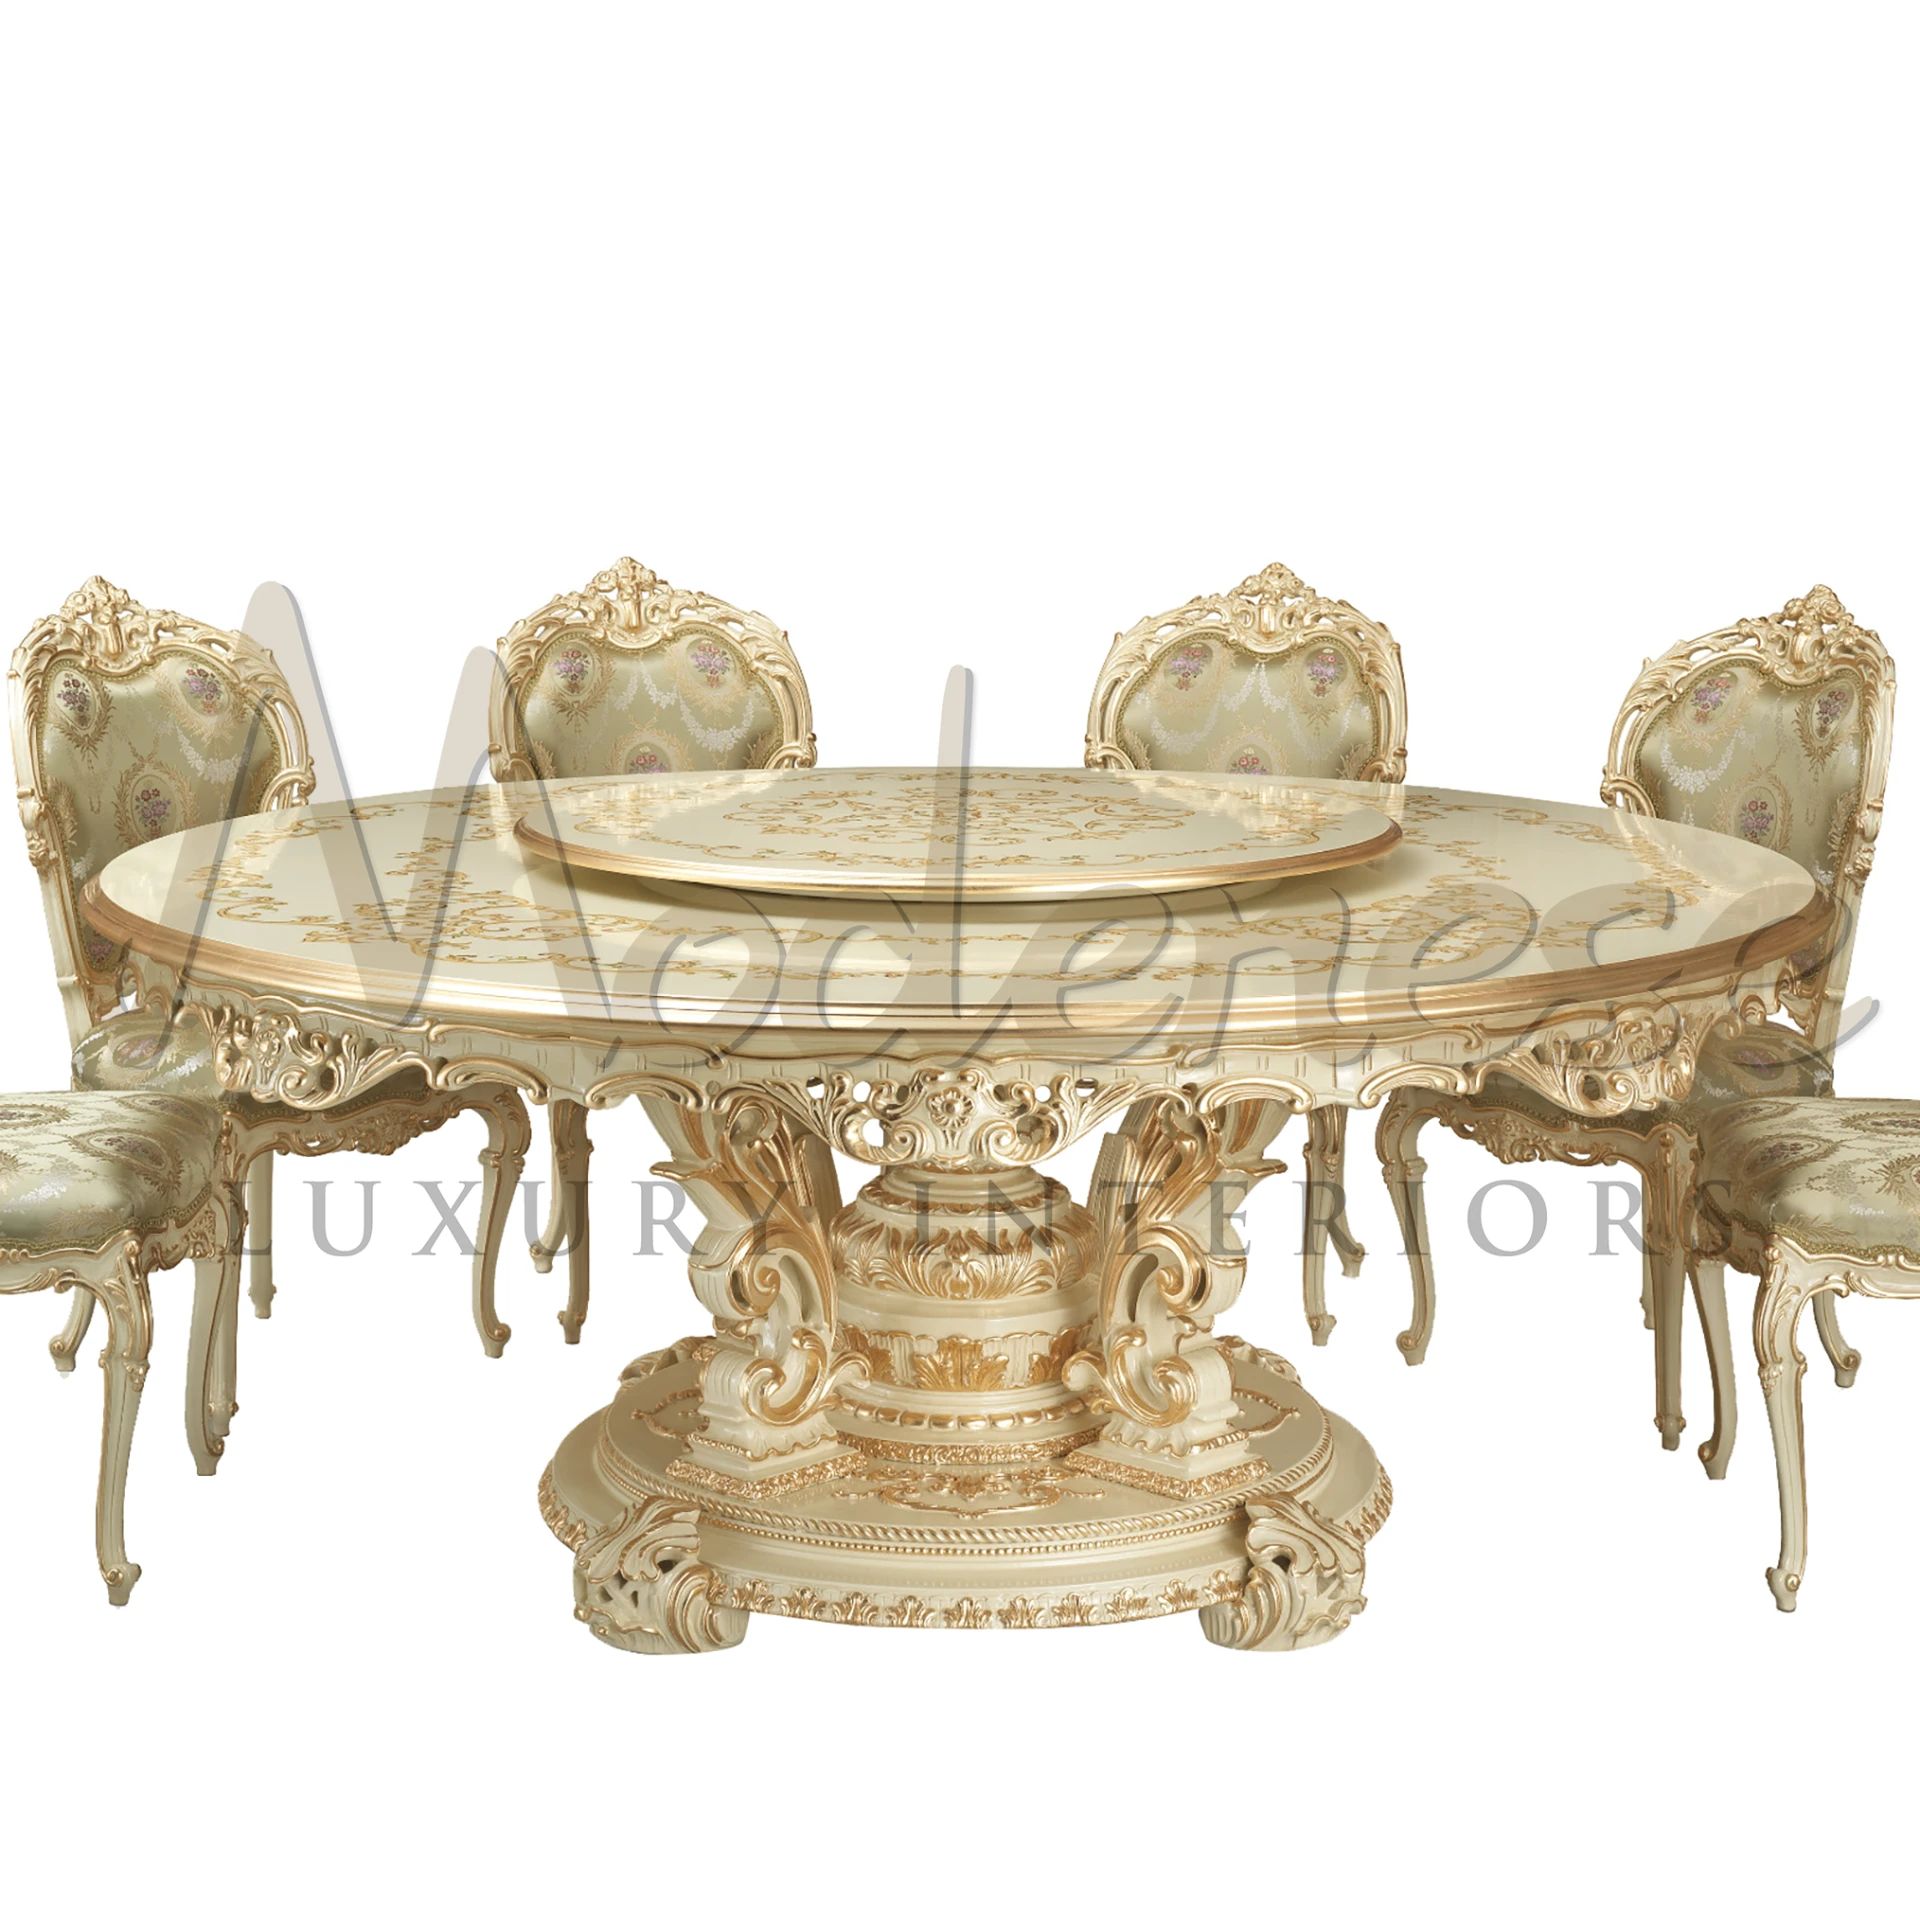 Lovely Victorian Style Round Dining table by Modenese Luxury Furniture with luxury chairs.